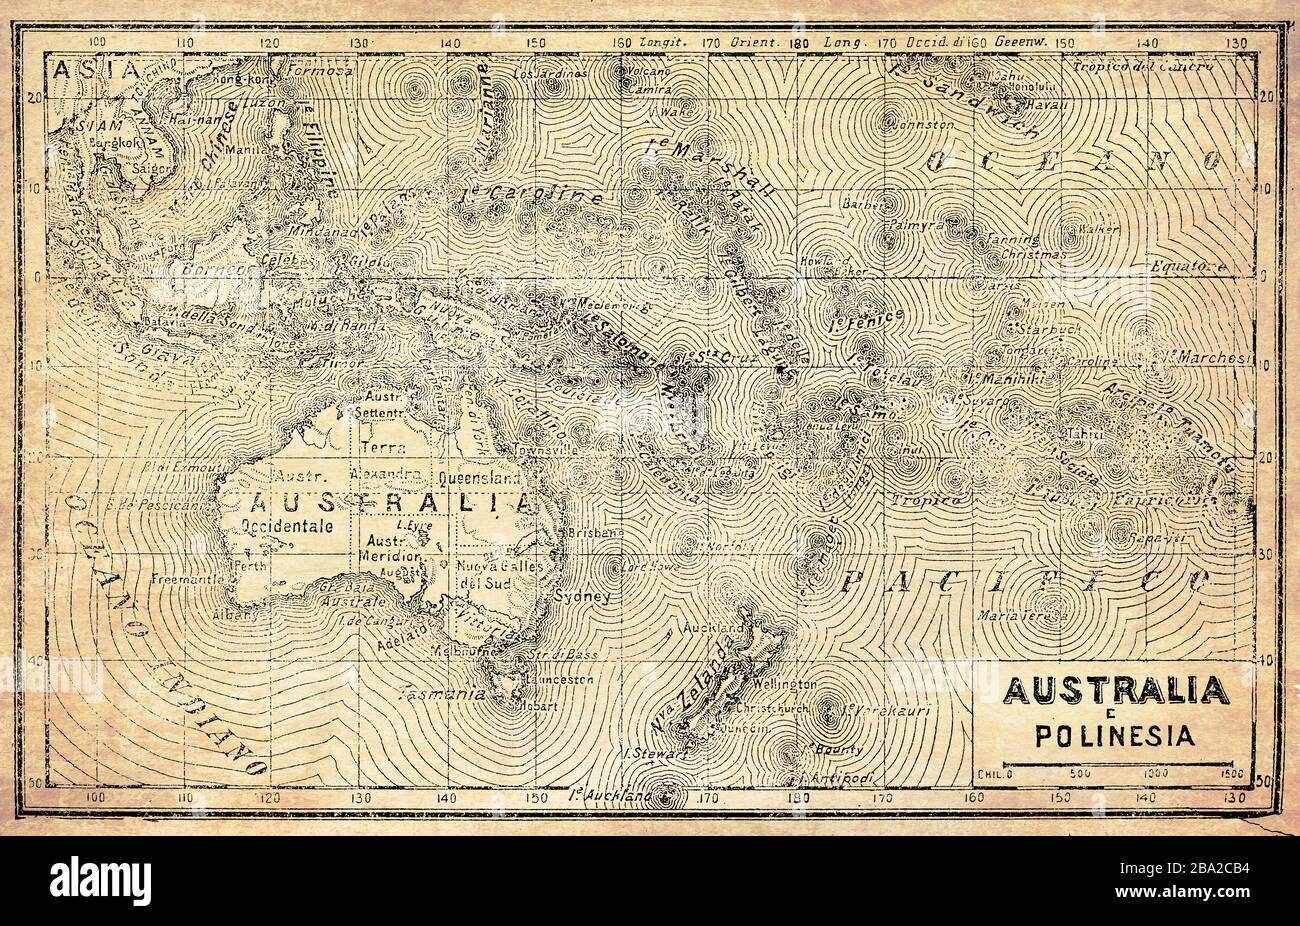 Ancient map of Australia, Polynesia and New Zealand with Italian names and descriptions Stock Photo